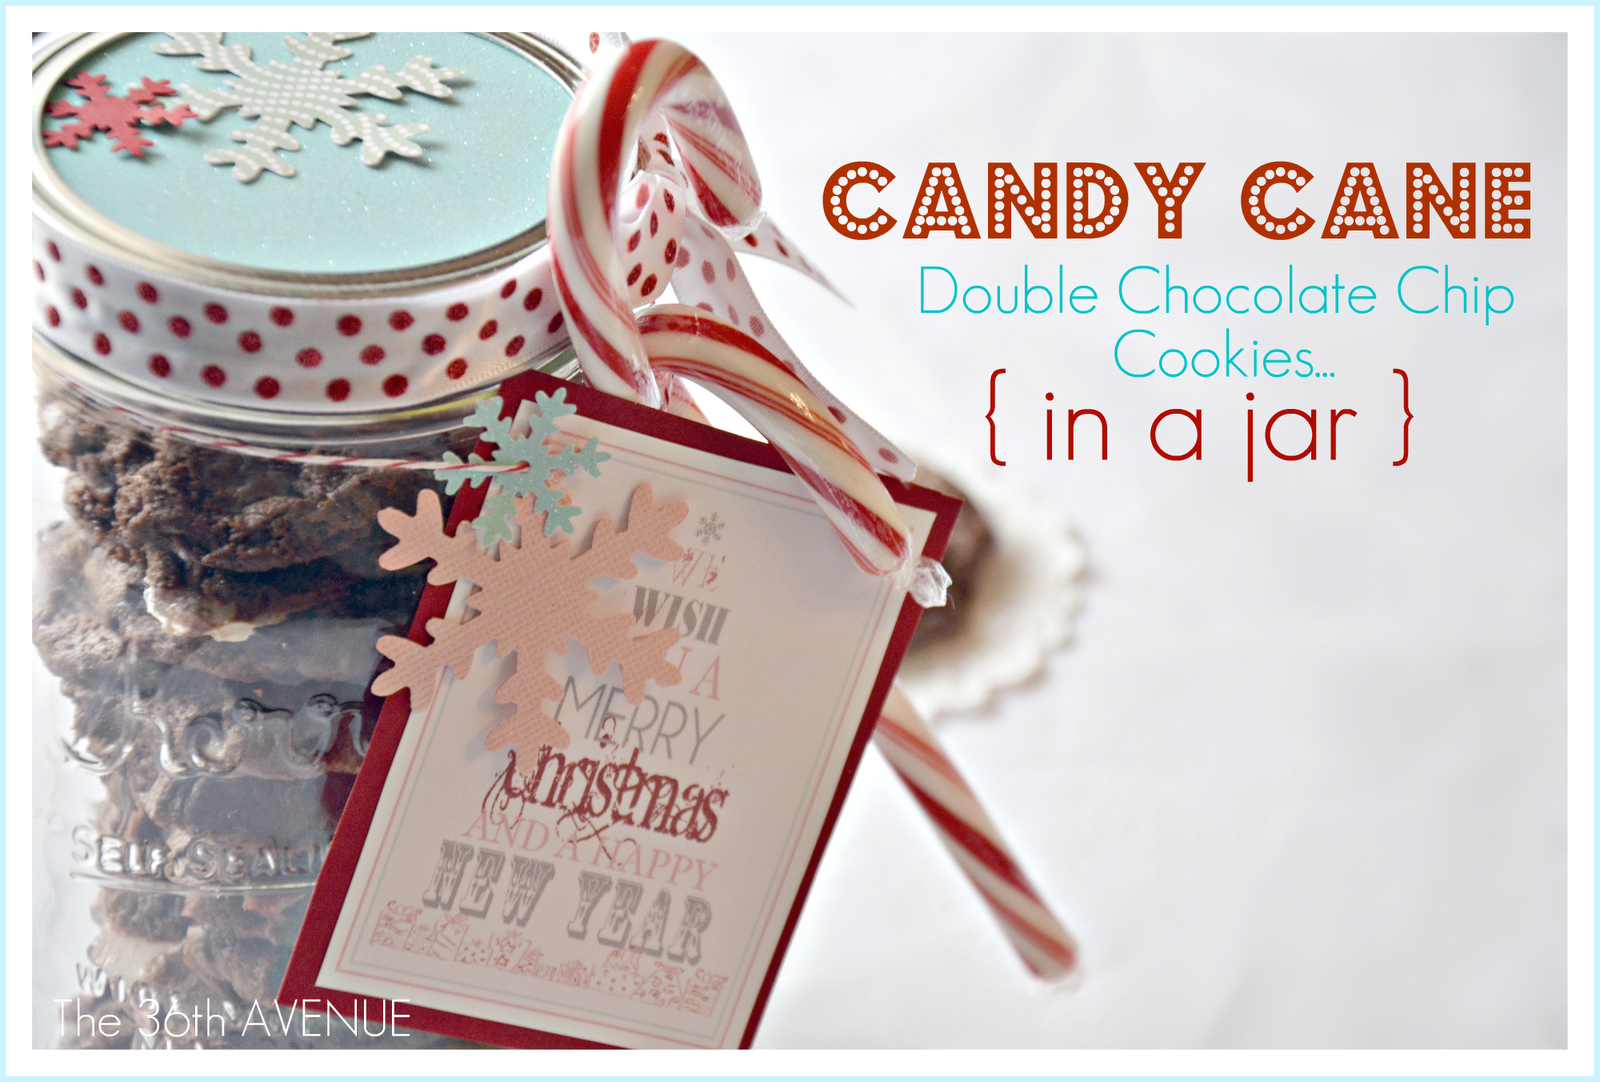 Last Minute Neighbor Gift Idea (with Free Printable!) - DIY Candy